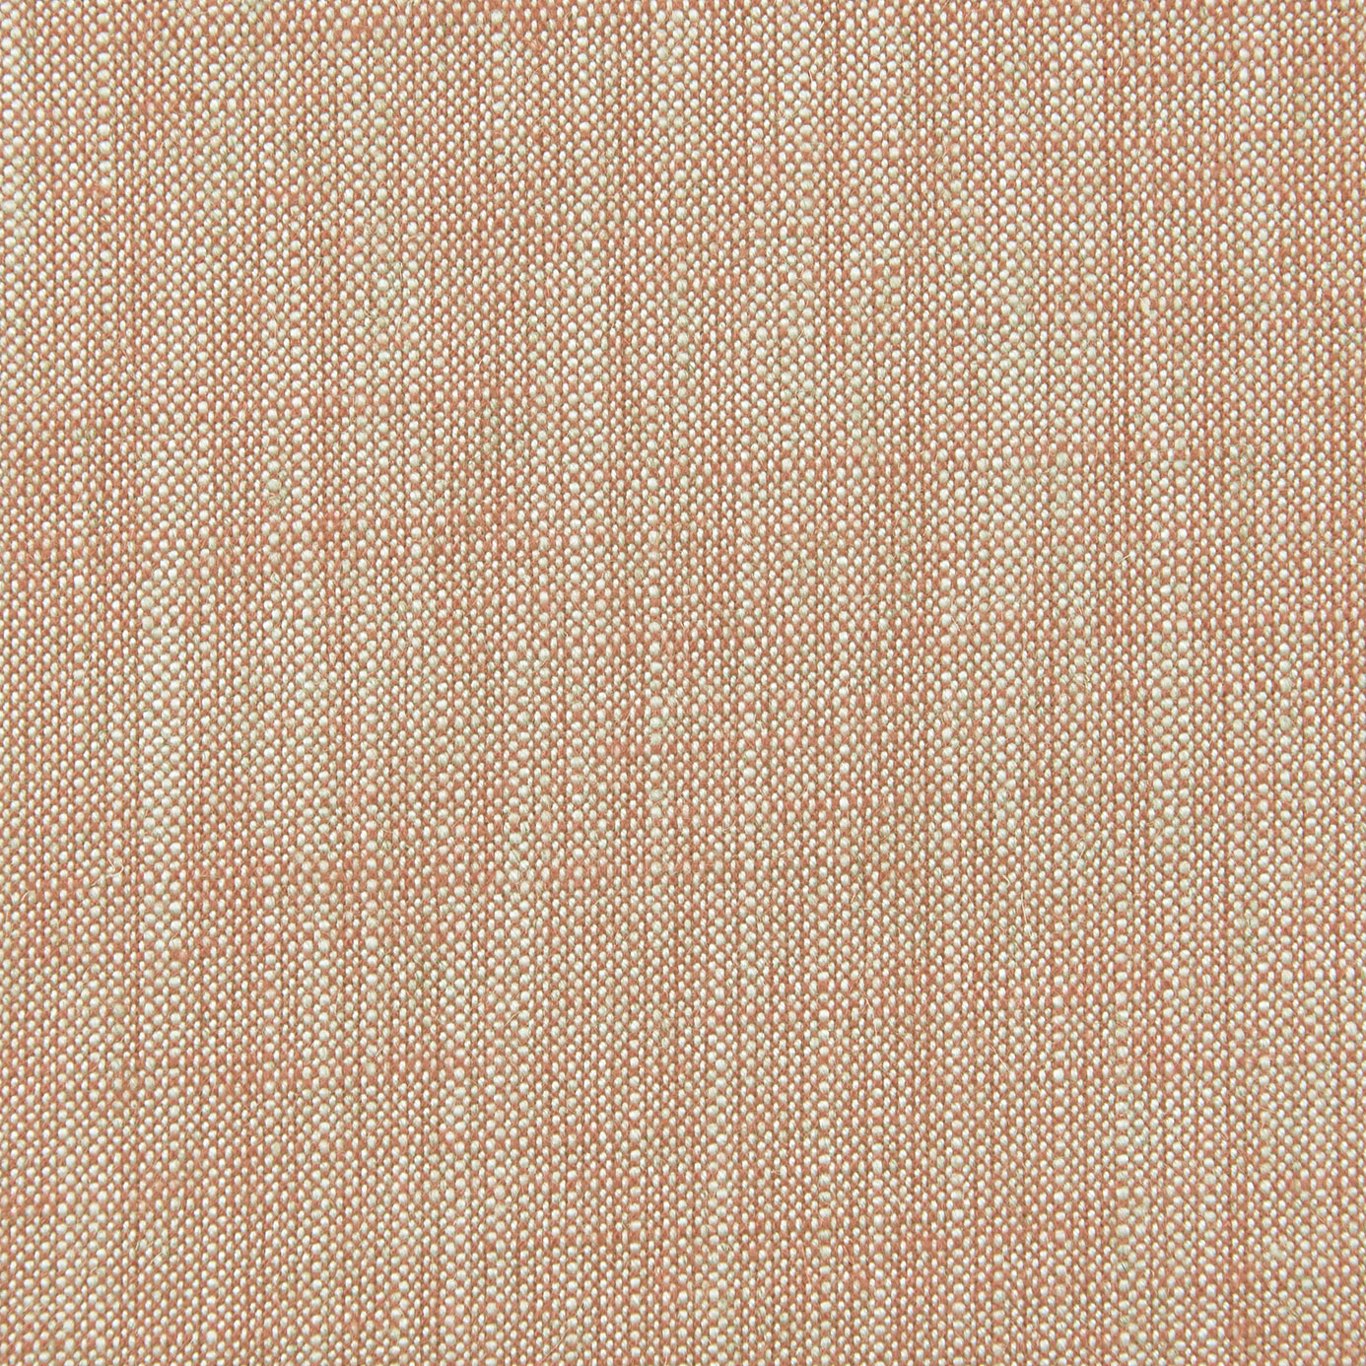 Biarritz Coral Fabric by CNC